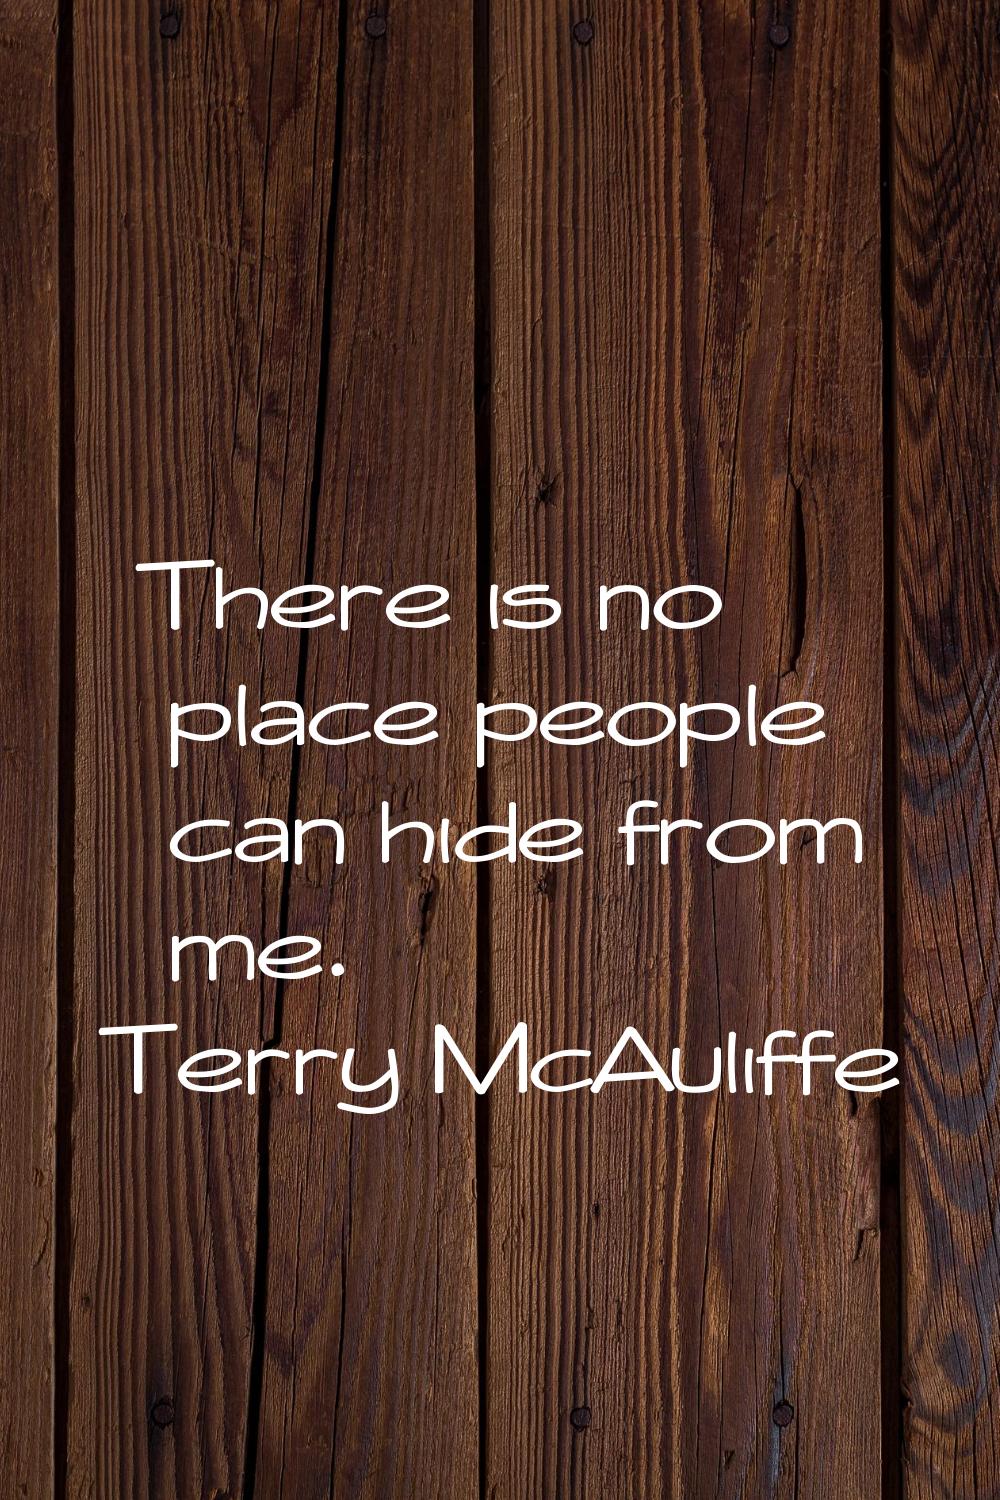 There is no place people can hide from me.